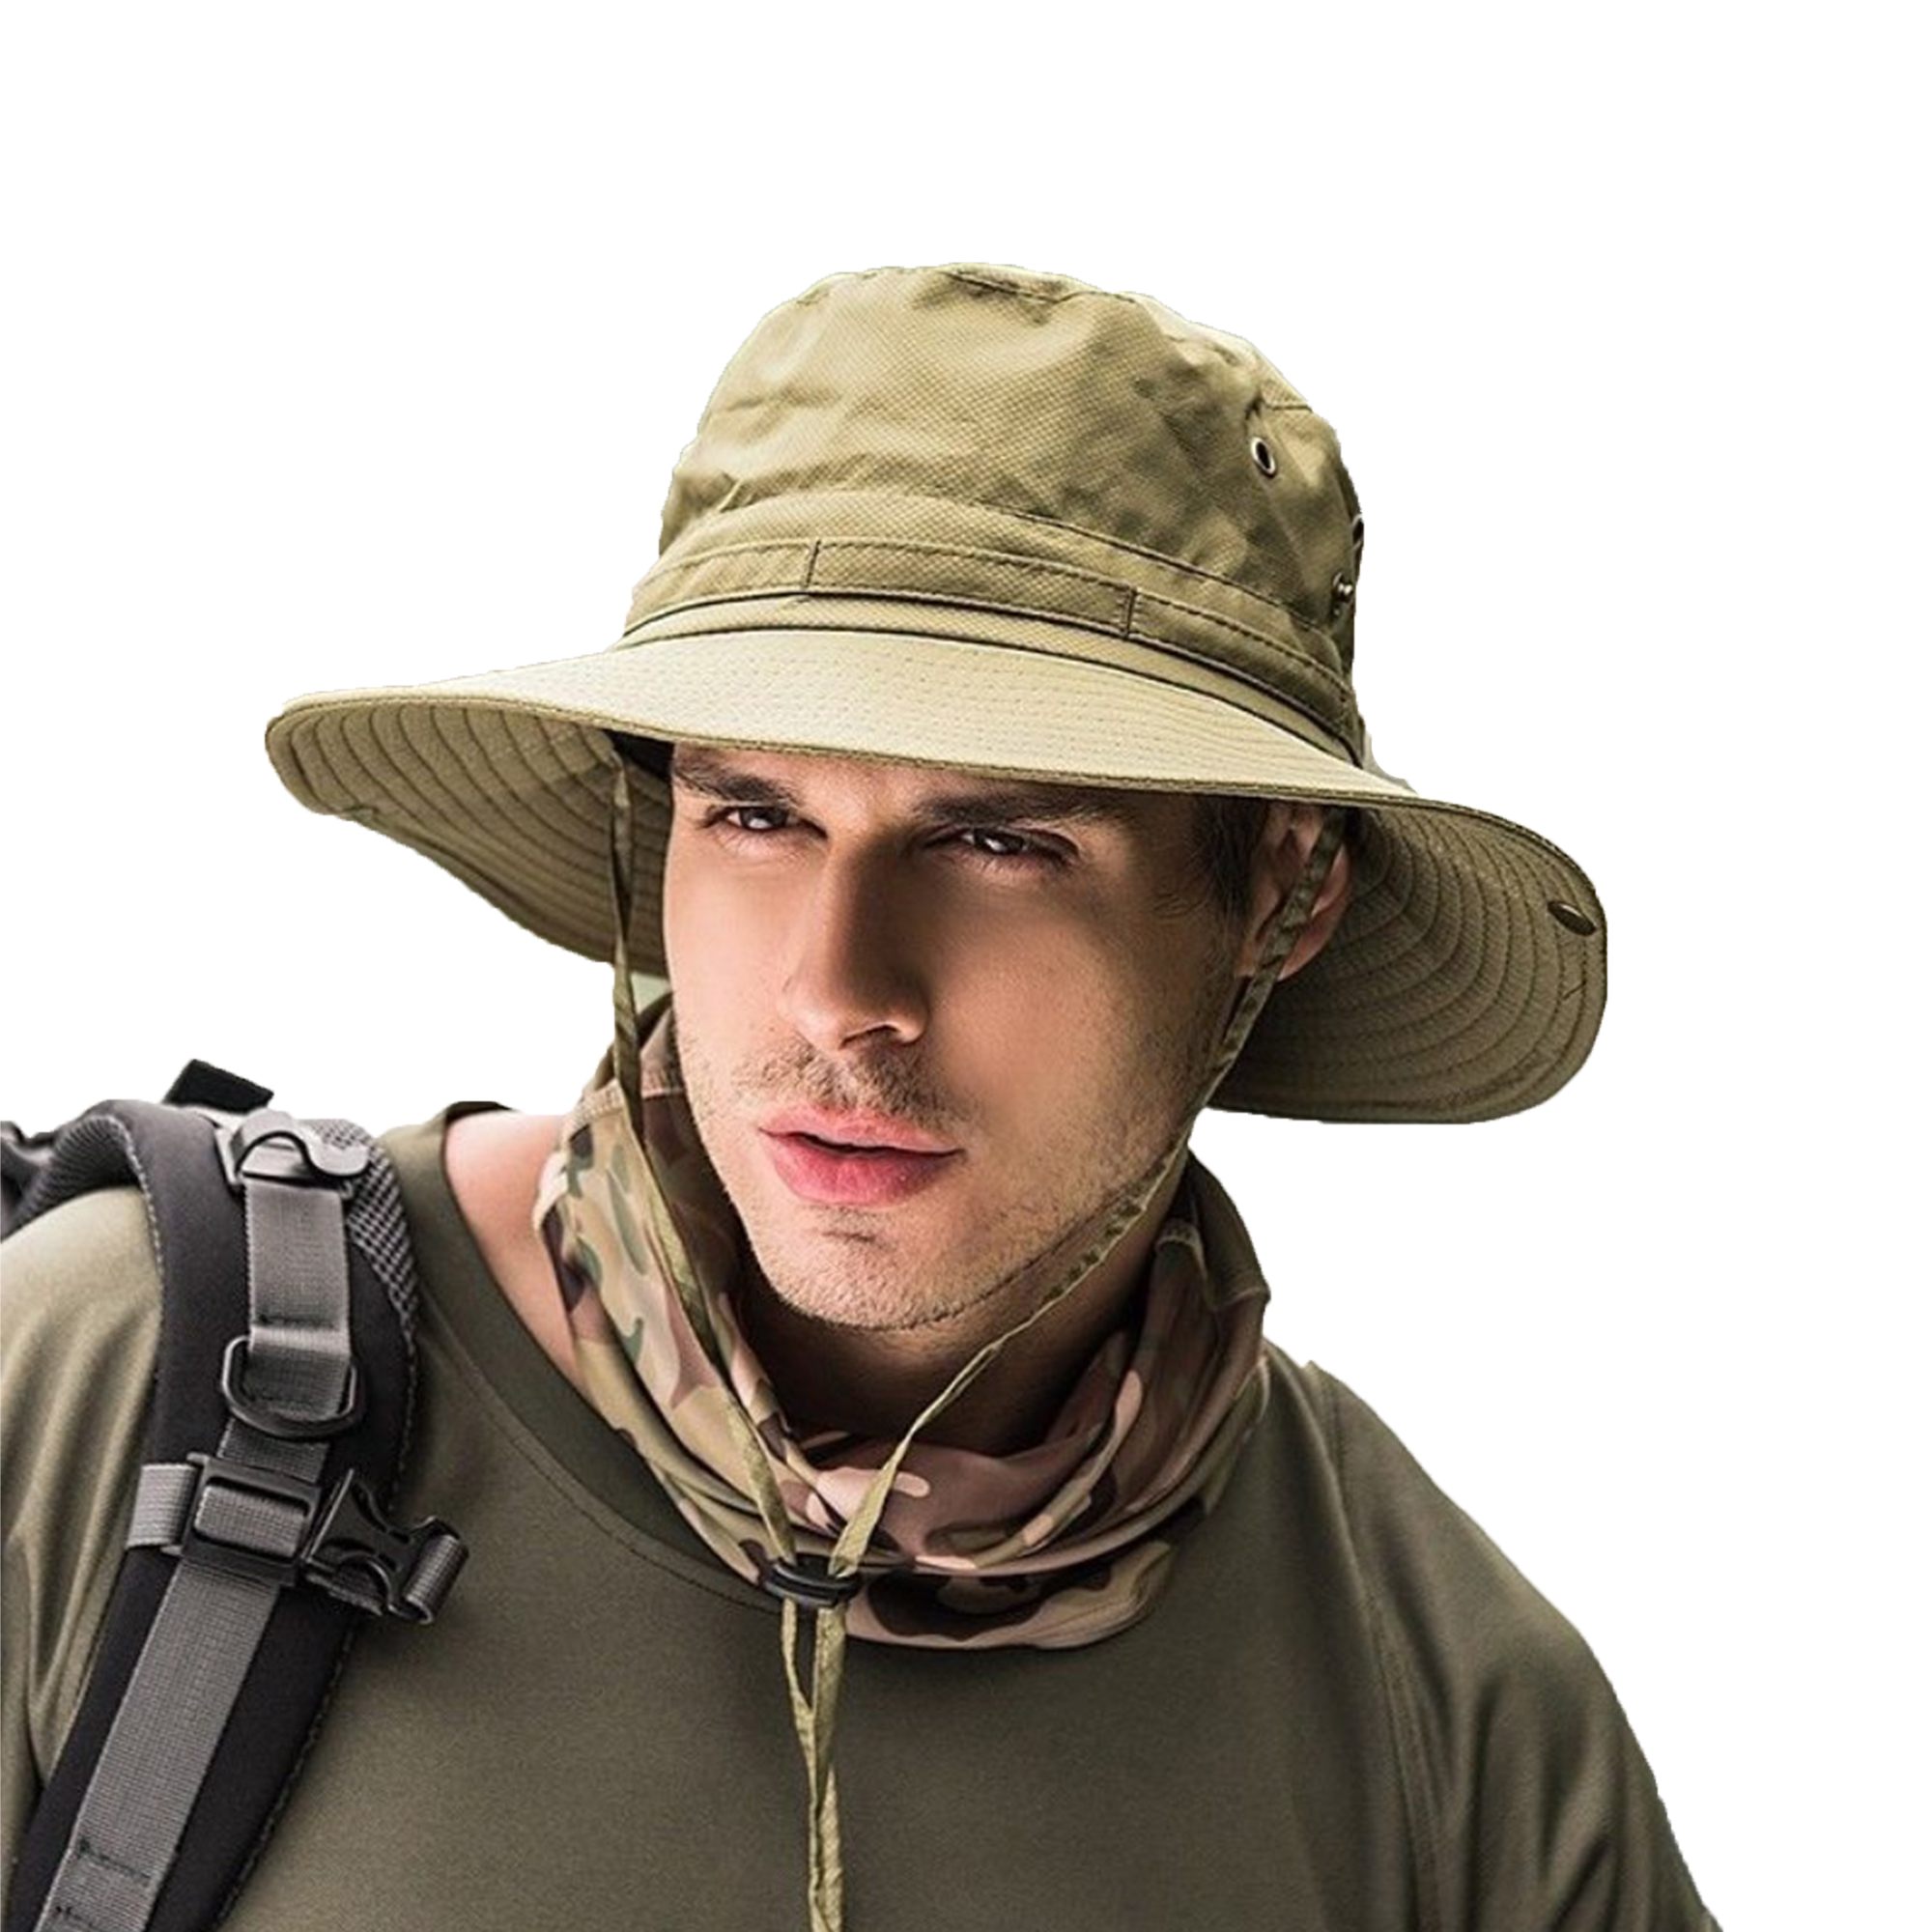 SUNSIOM Men's Military Bucket Hat Boonie Hunting Fishing Climbing Outdoor Wide Cap Brim - image 1 of 6